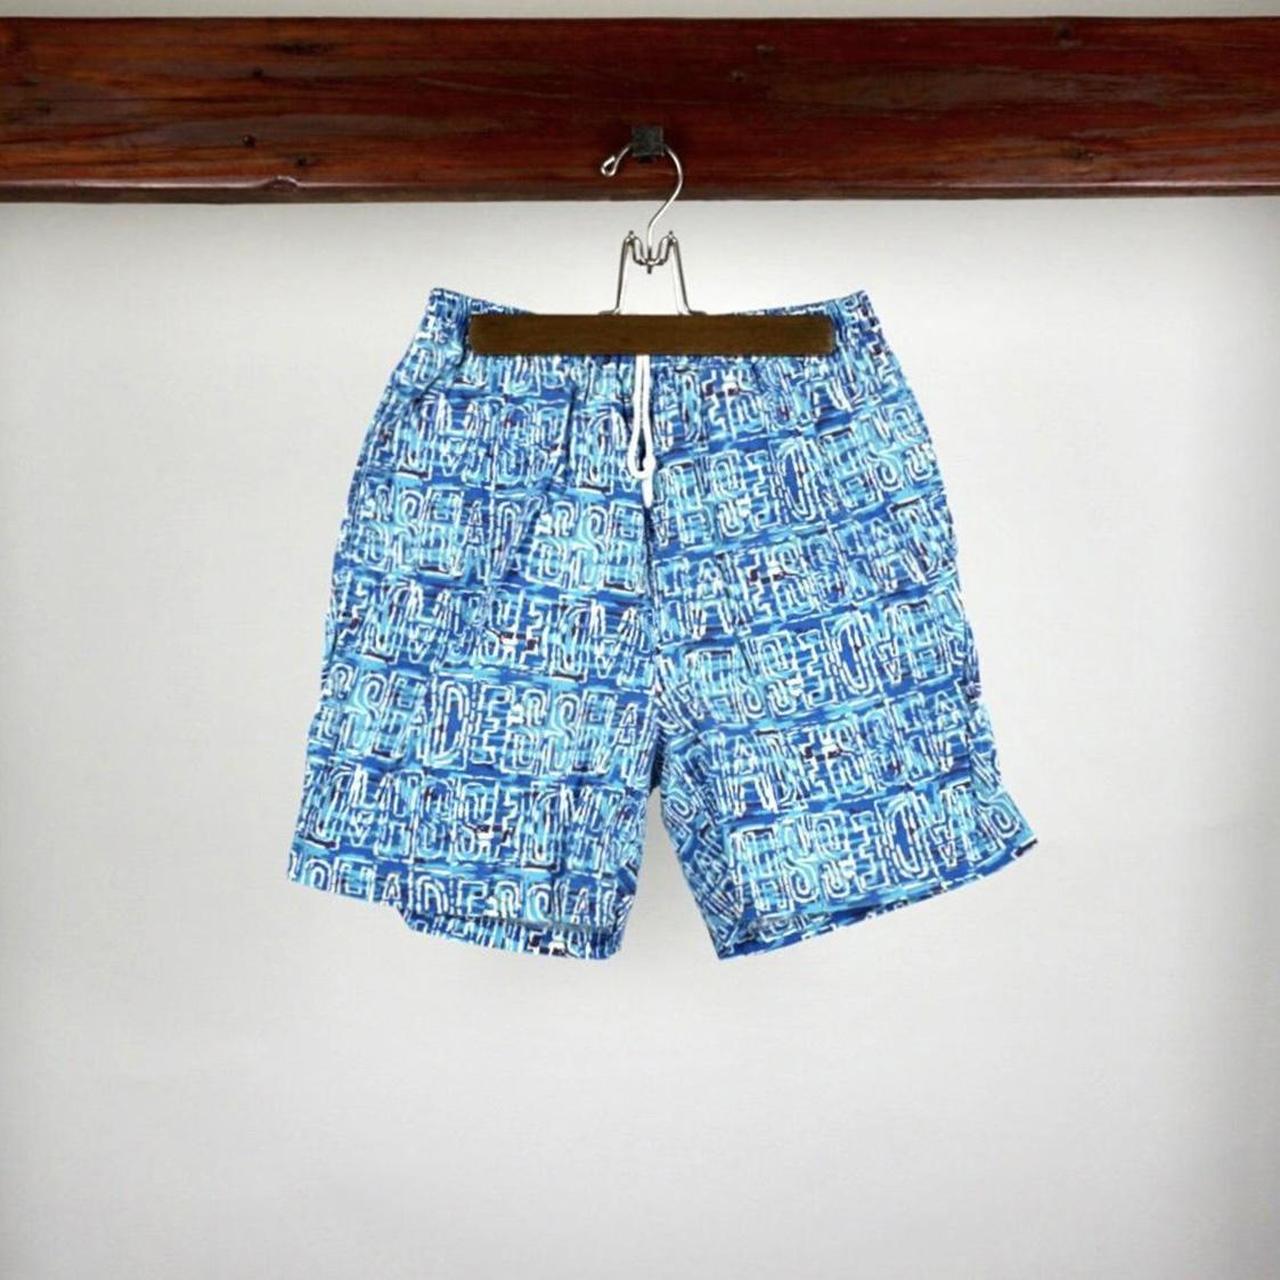 American Vintage Men's Blue and White Shorts